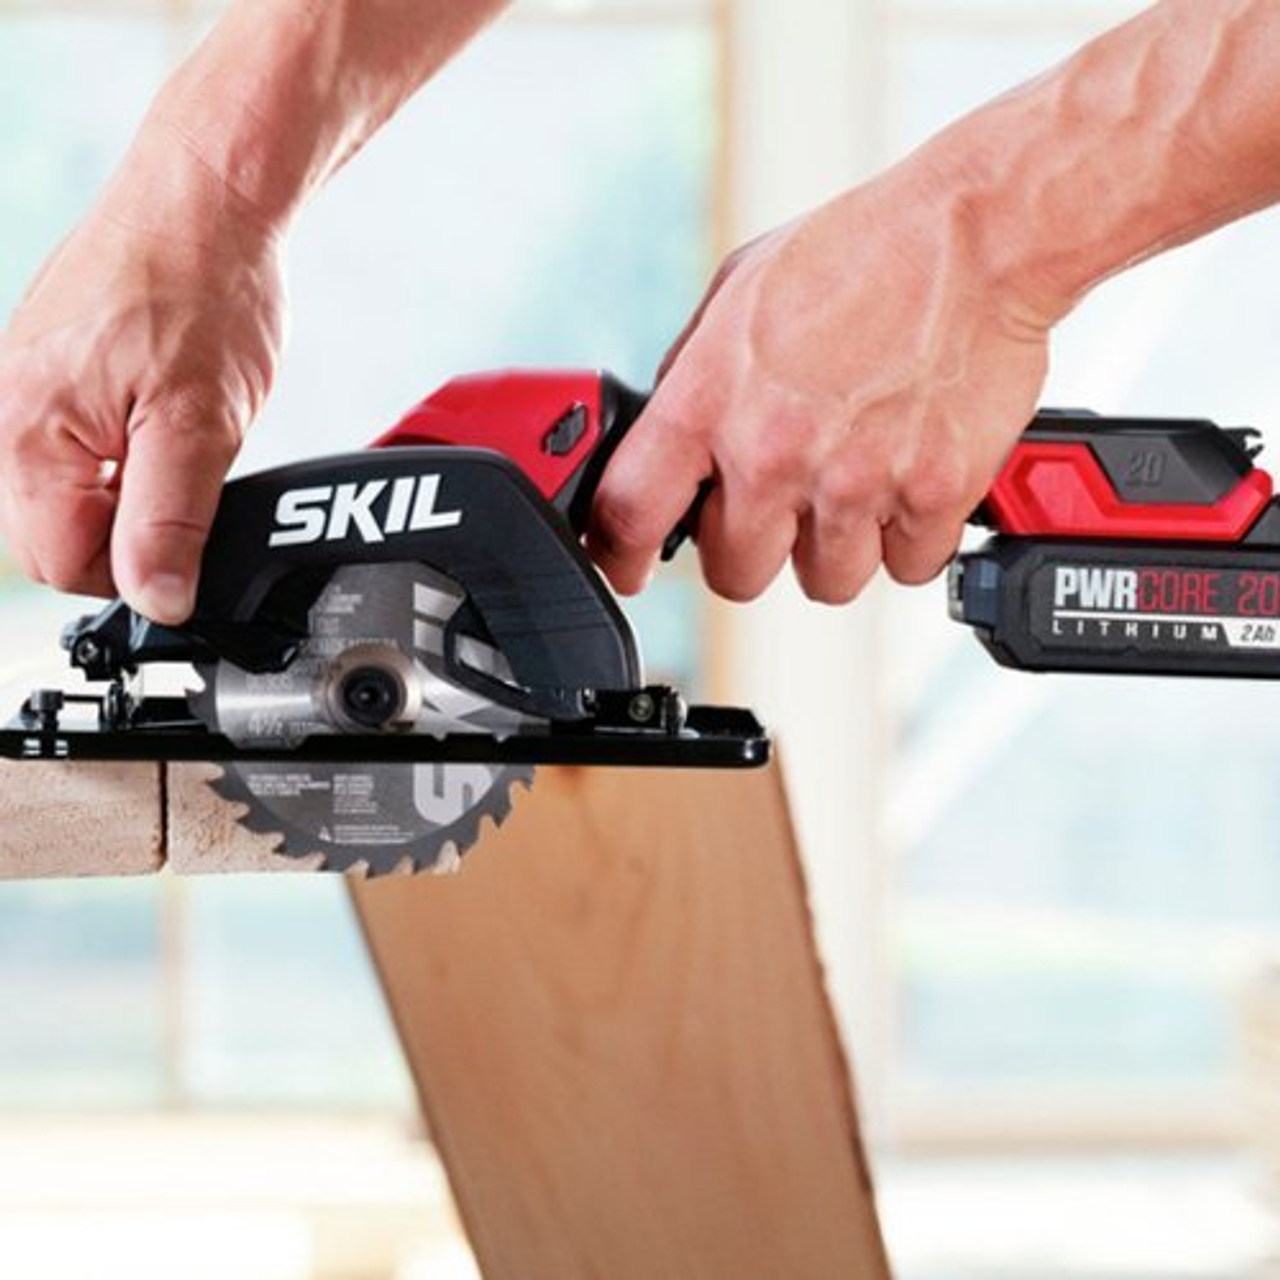 SKIL PWR CORE 20 Brushless 4-1/2 IN Comp Circ Saw Kit - Black/Red